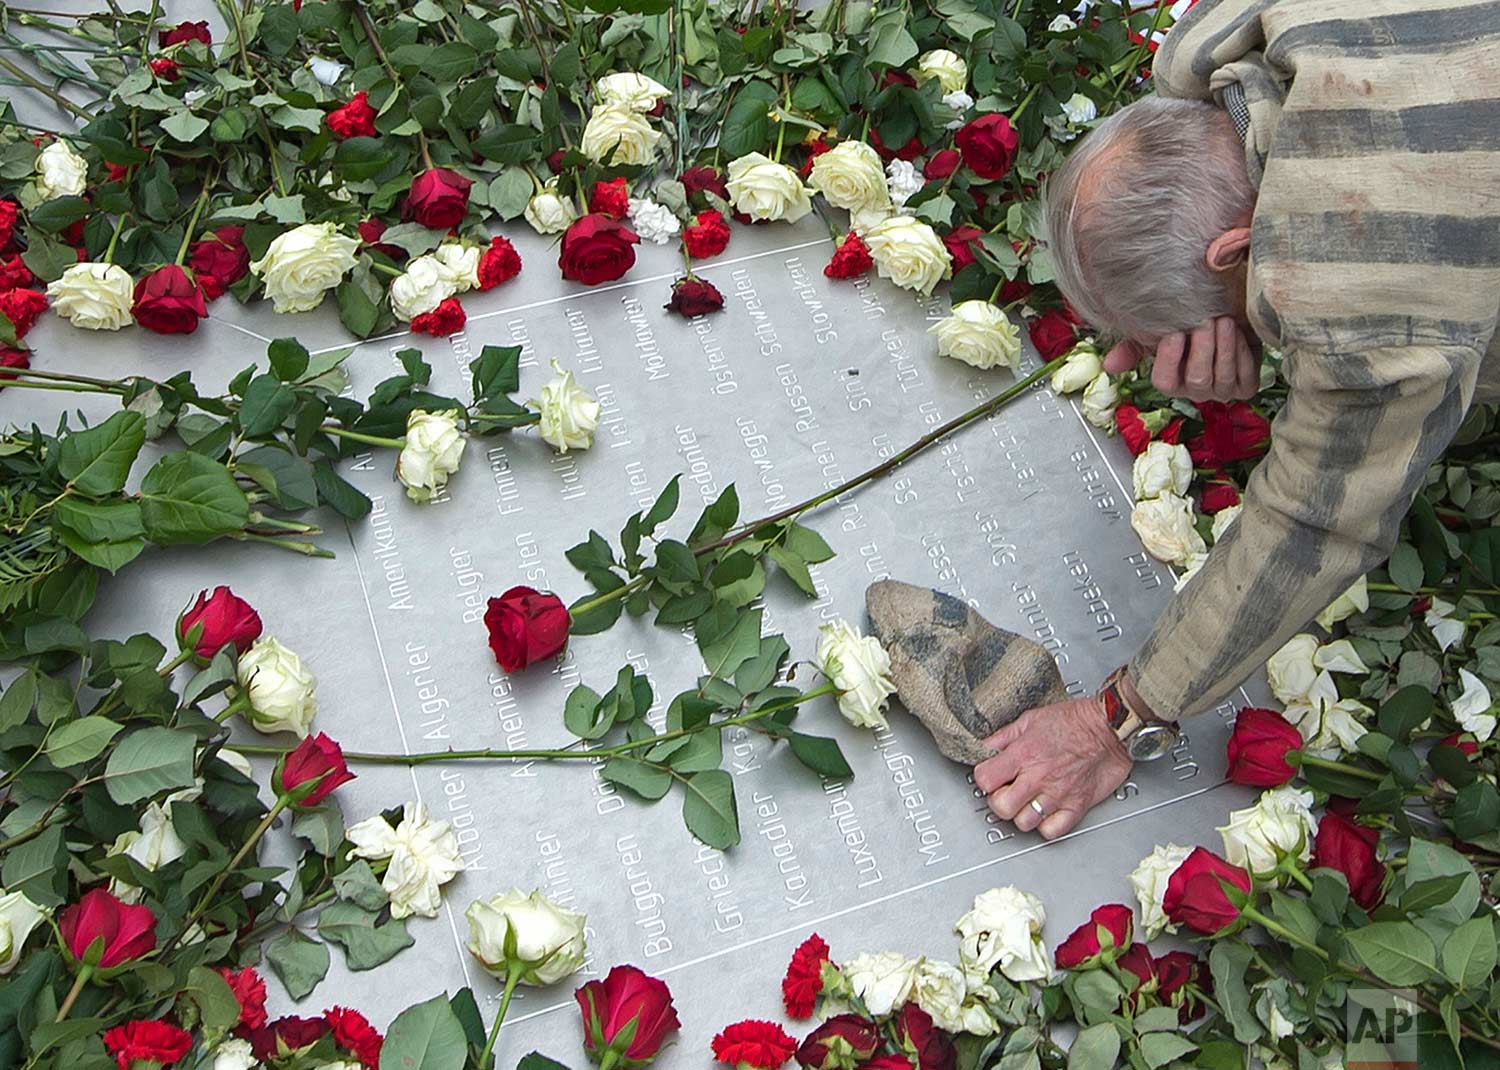  In this Tuesday, April 11, 2017 photo, Nazi concentration camp survivor Alexander Bytschok of Kiev, Ukraine, mourns on a metal plaque during the commemoration ceremonies for the 72th anniversary of the liberation of the former Nazi concentration cam